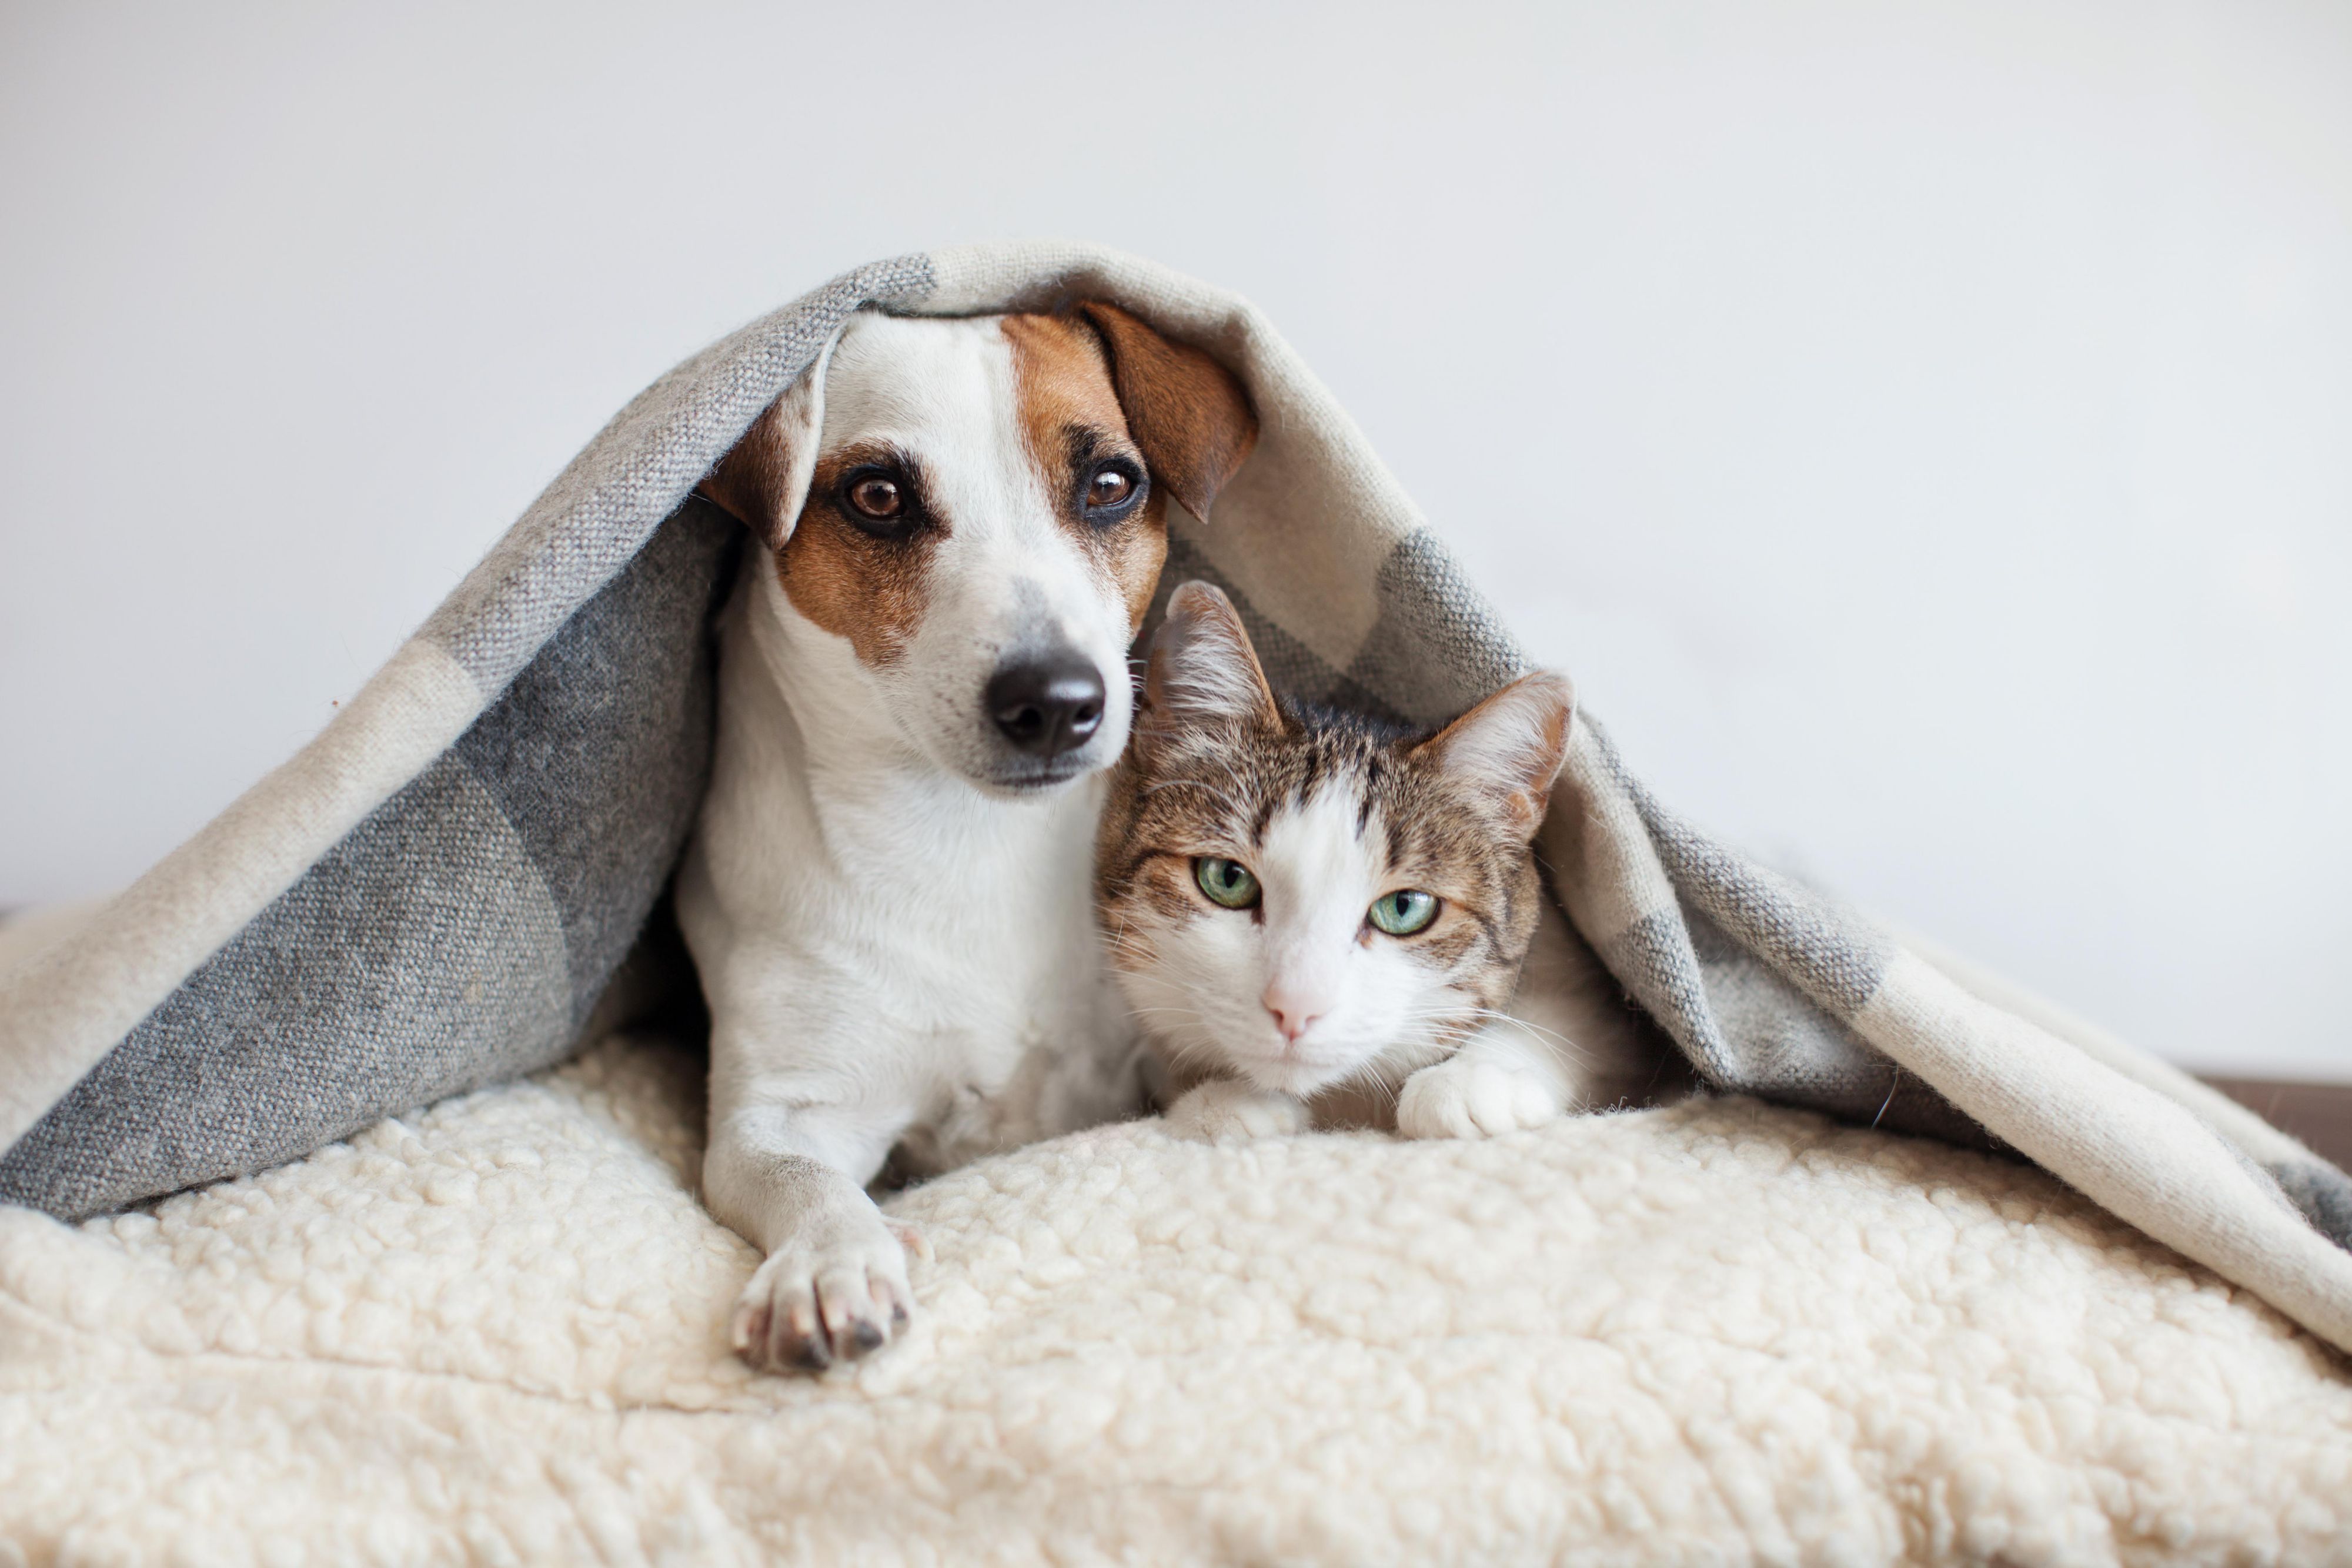 Don't leave your pet at home -  pets are family! The Hotel Indigo Kansas City Downtown is a pet friendly hotel!